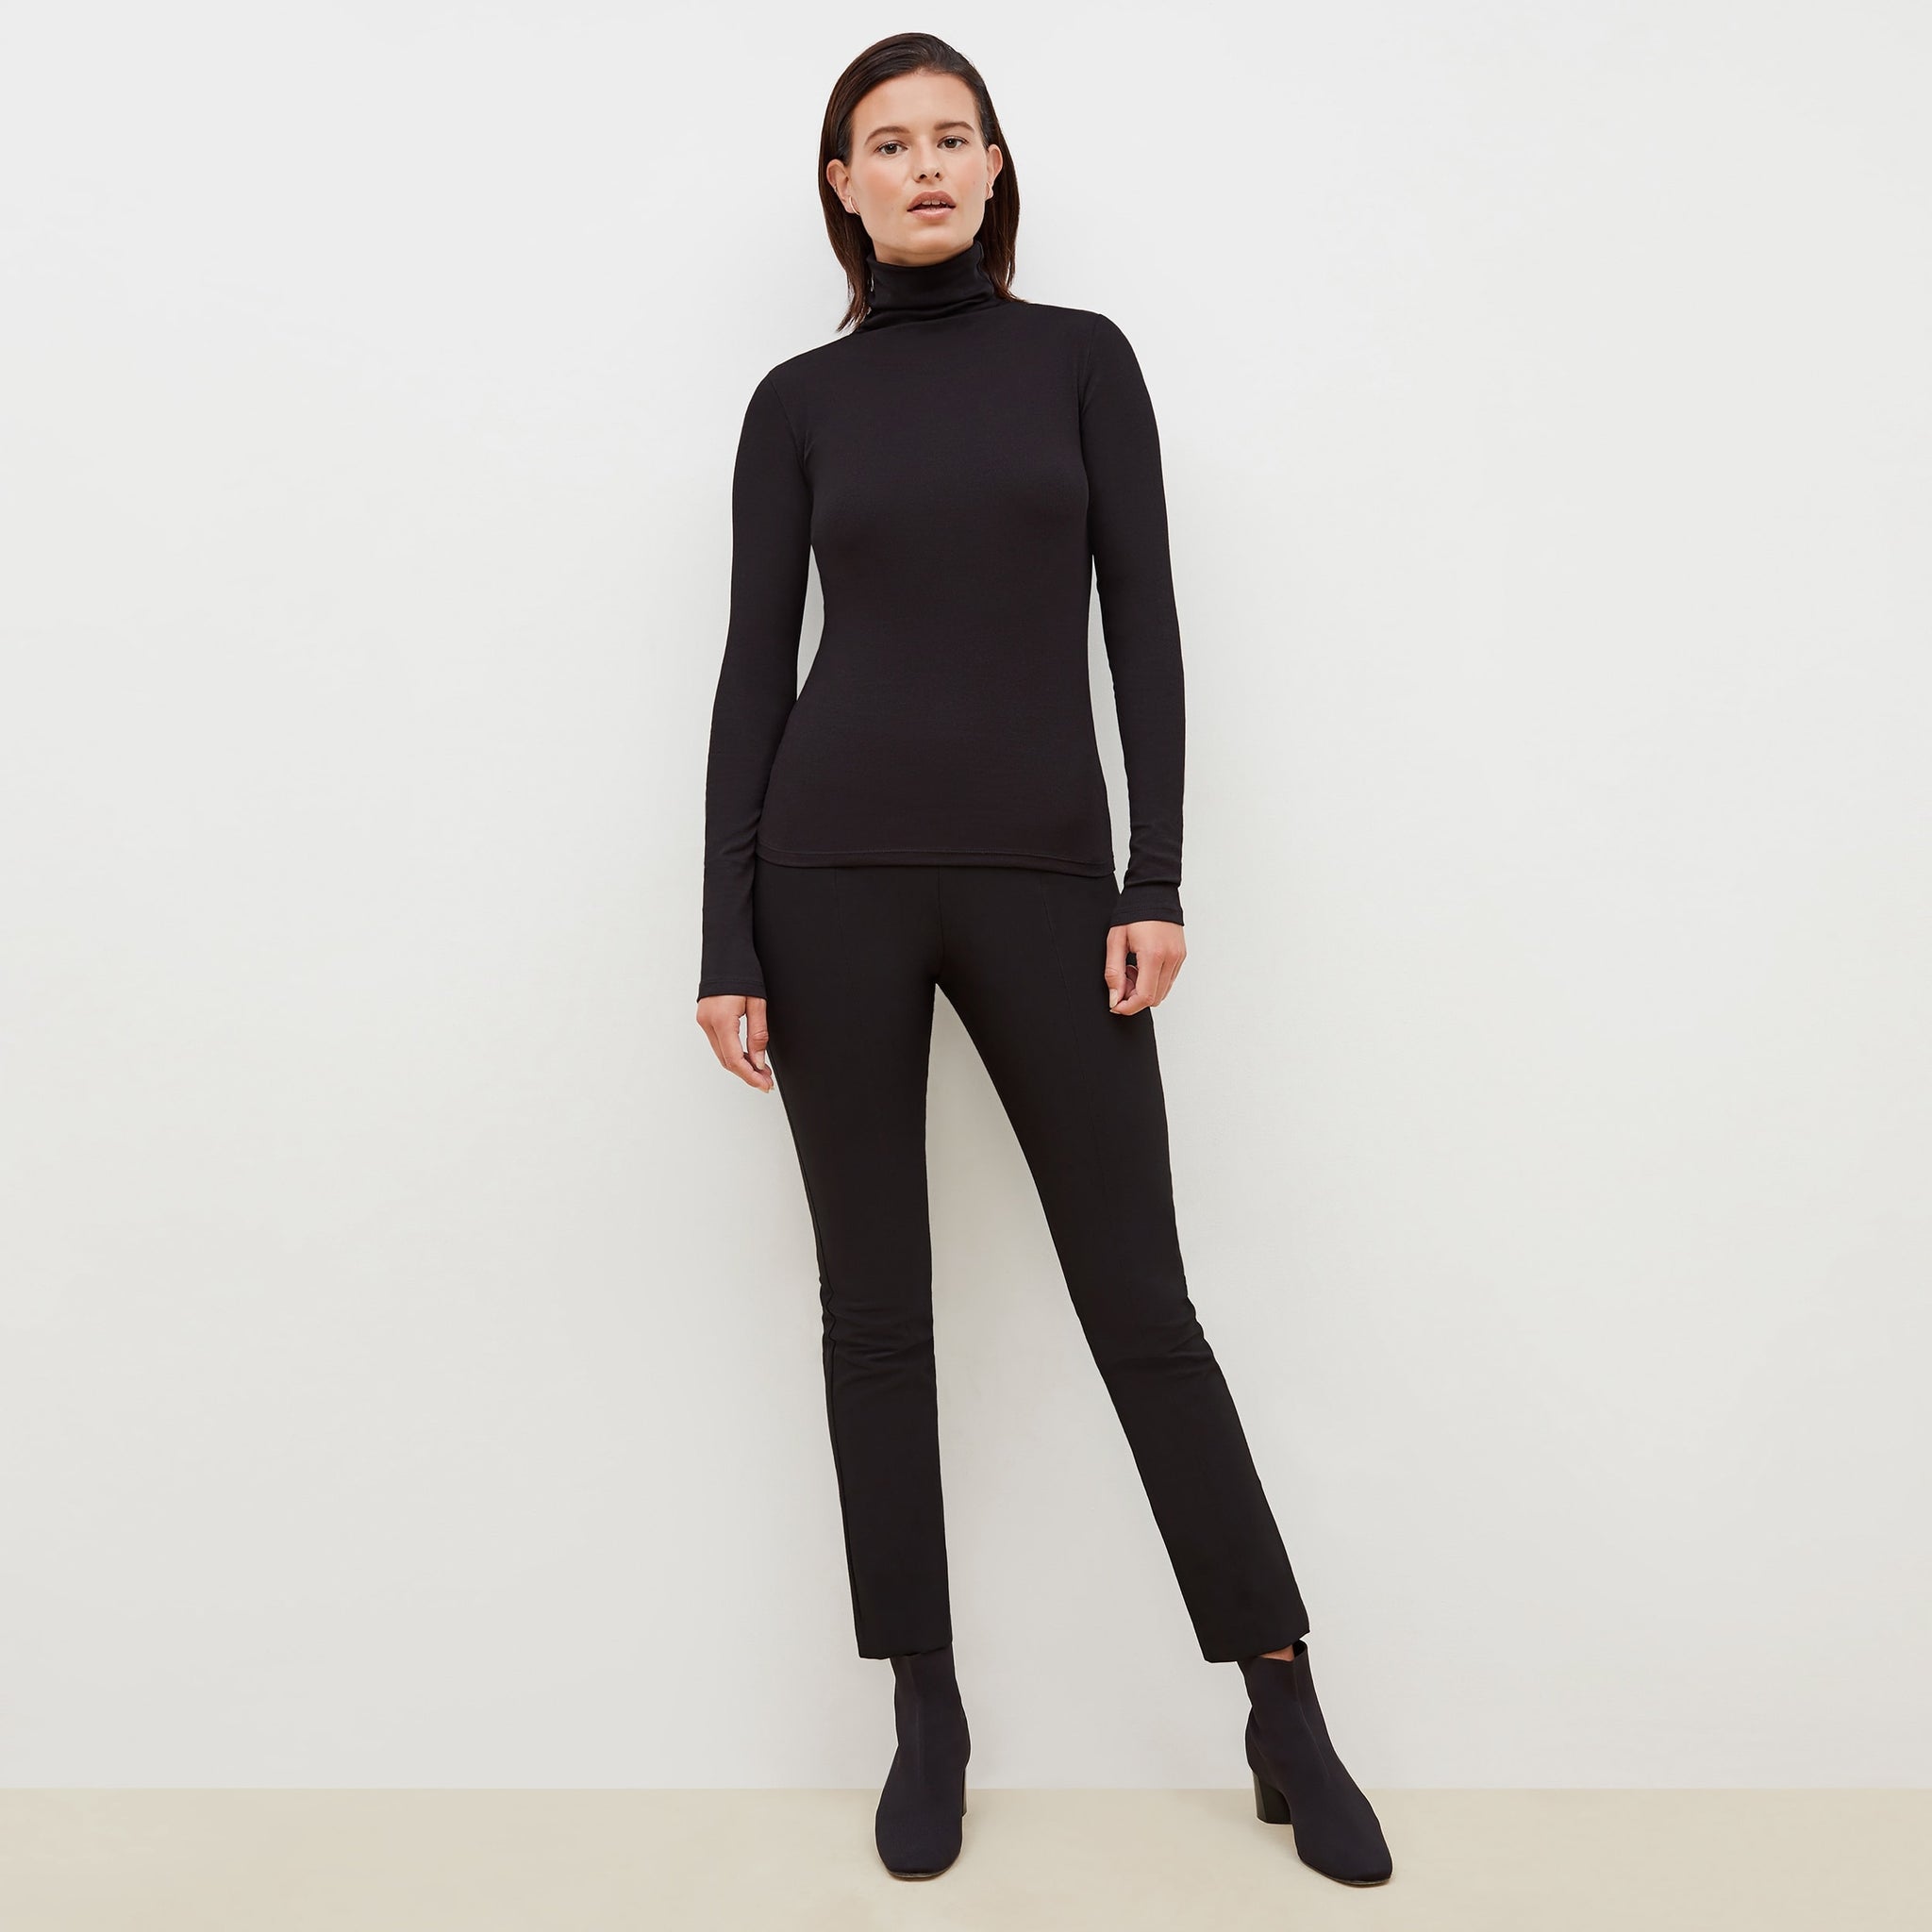 Front image of a woman standing wearing the axam top in black